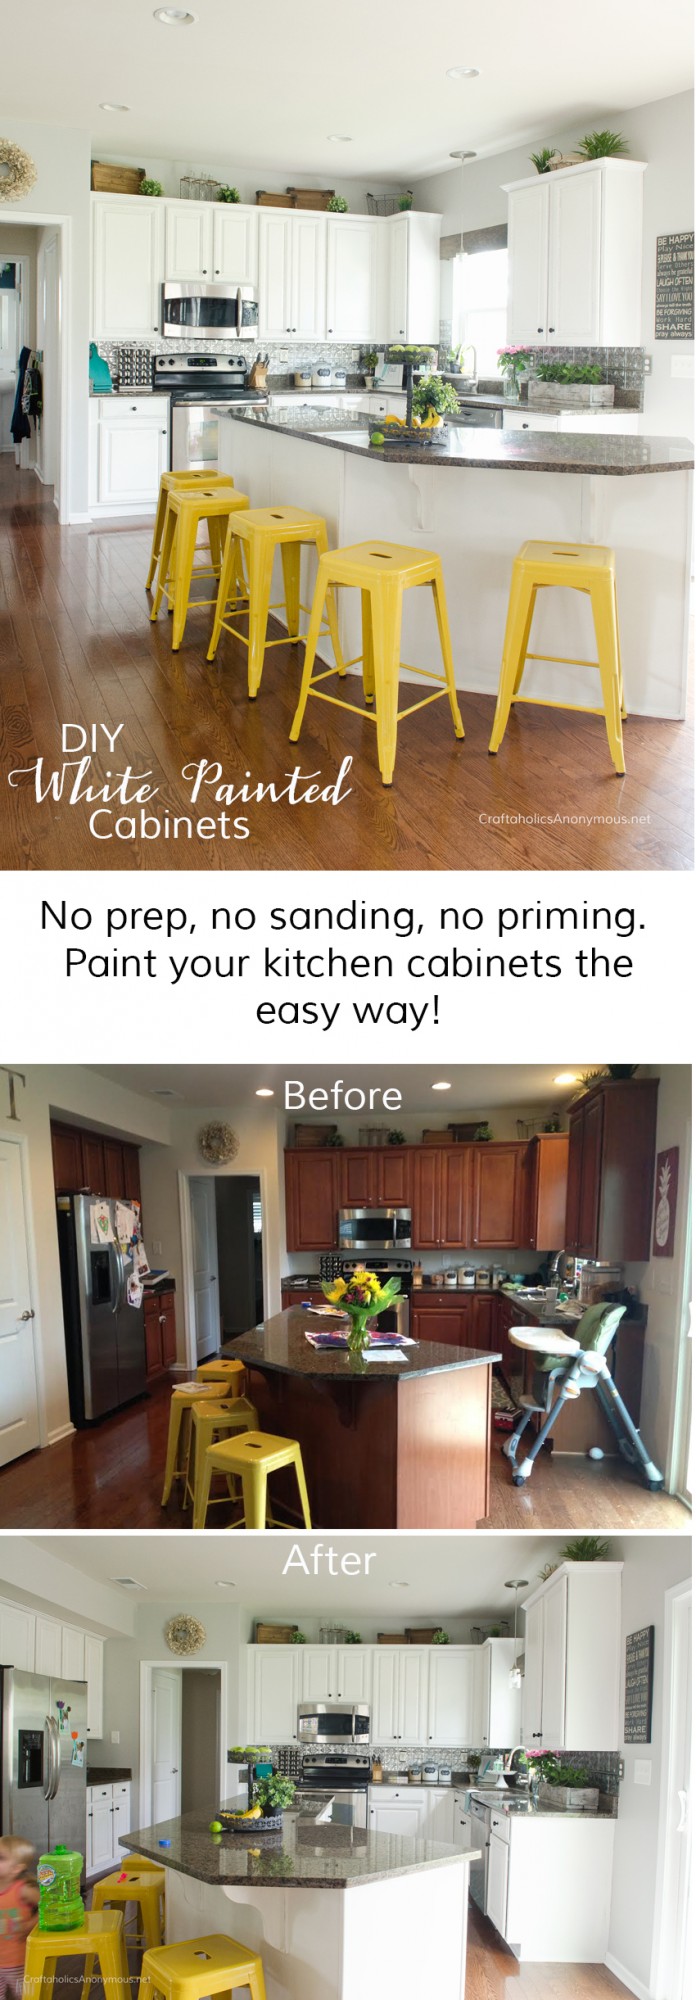 How to paint Kitchen Cabinets white with no prep using chalk paint powder.